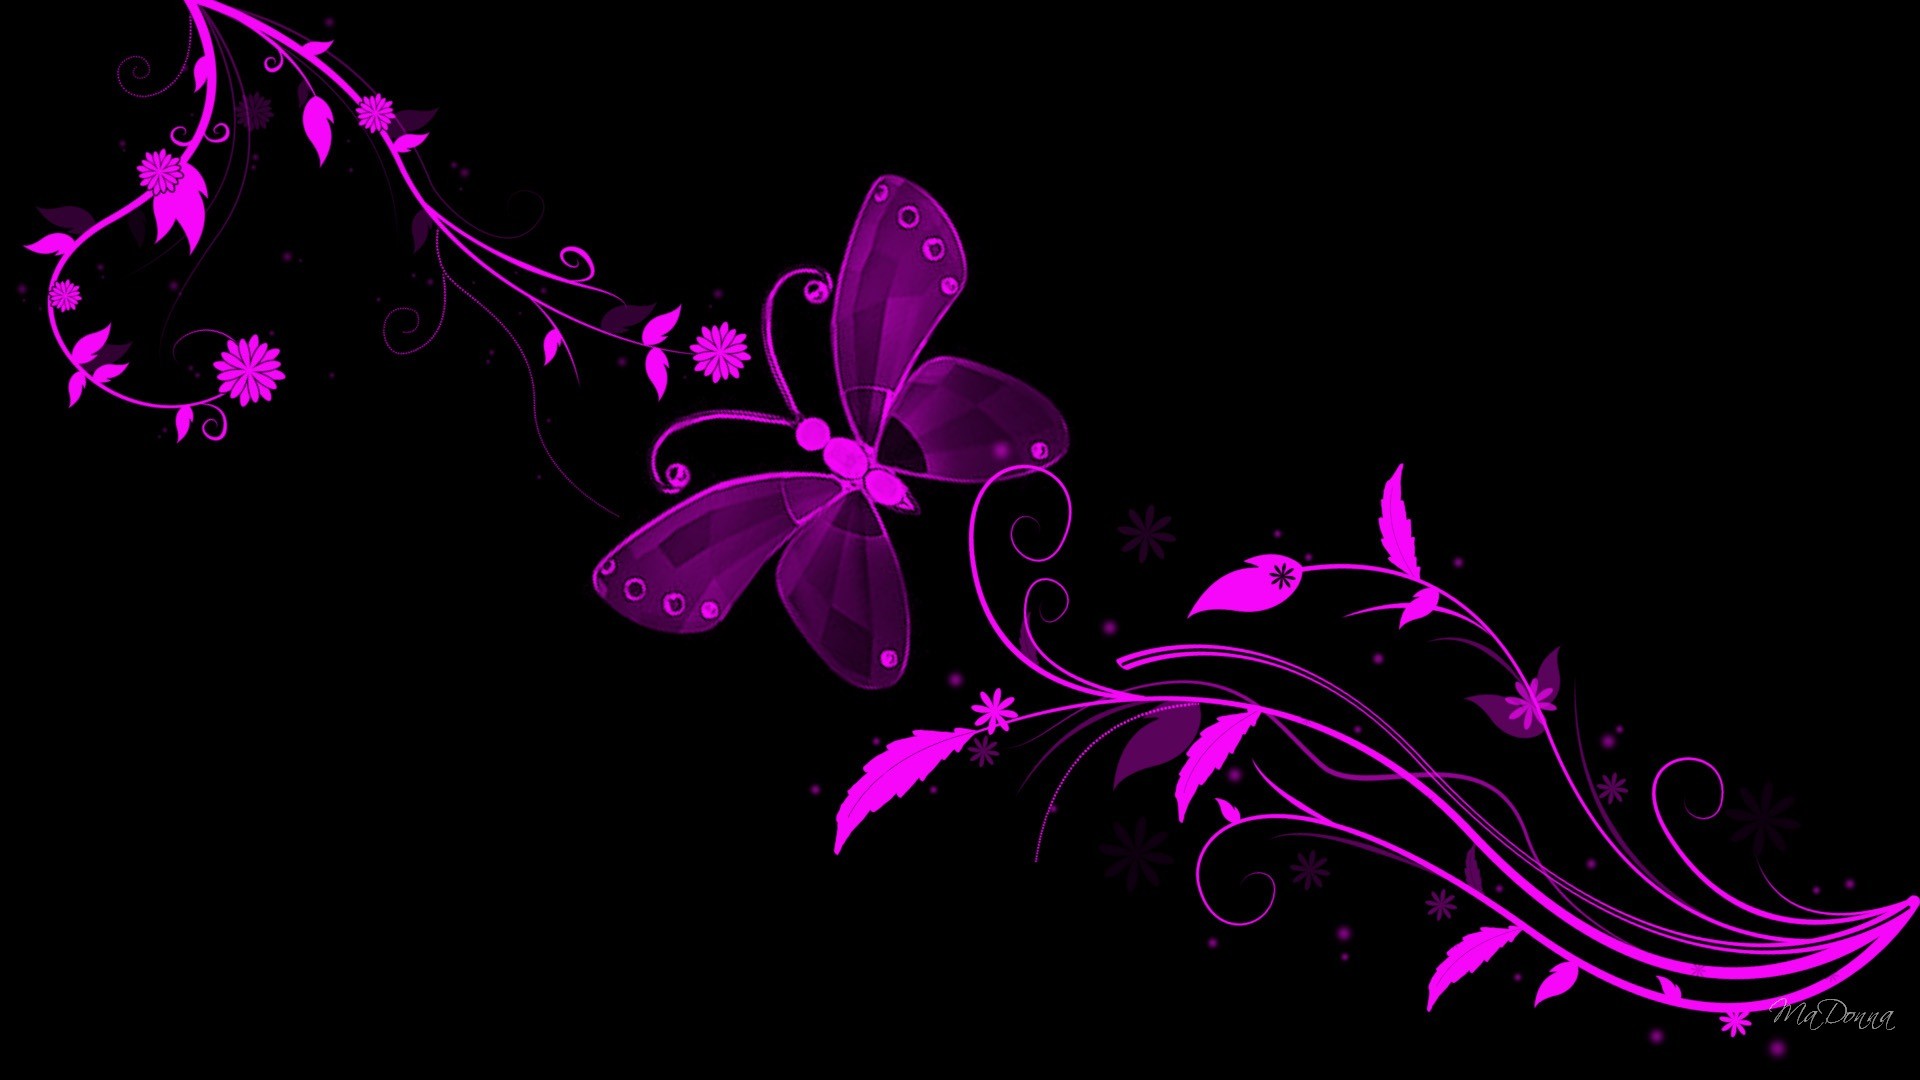 1920x1080 Abstract Flowers Backgrounds 6907 Hd Wallpapers in Flowers - Imagesci .